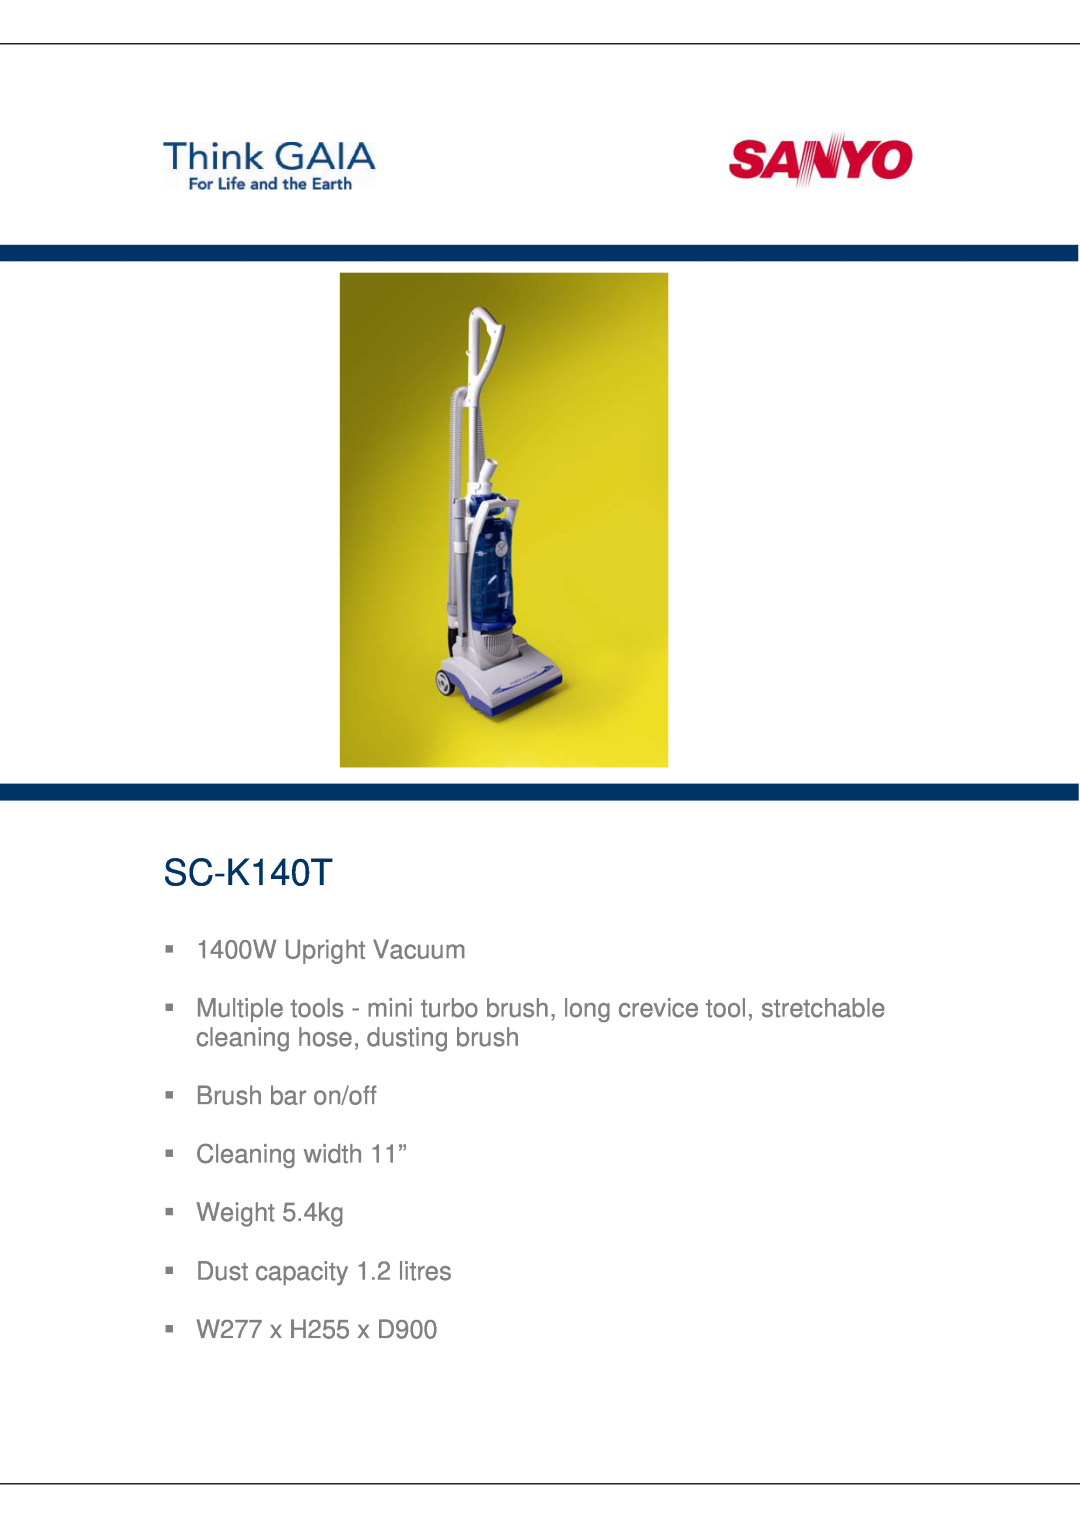 Sanyo SC-K140T manual 1400W Upright Vacuum, Brush bar on/off Cleaning width 11” Weight 5.4kg 